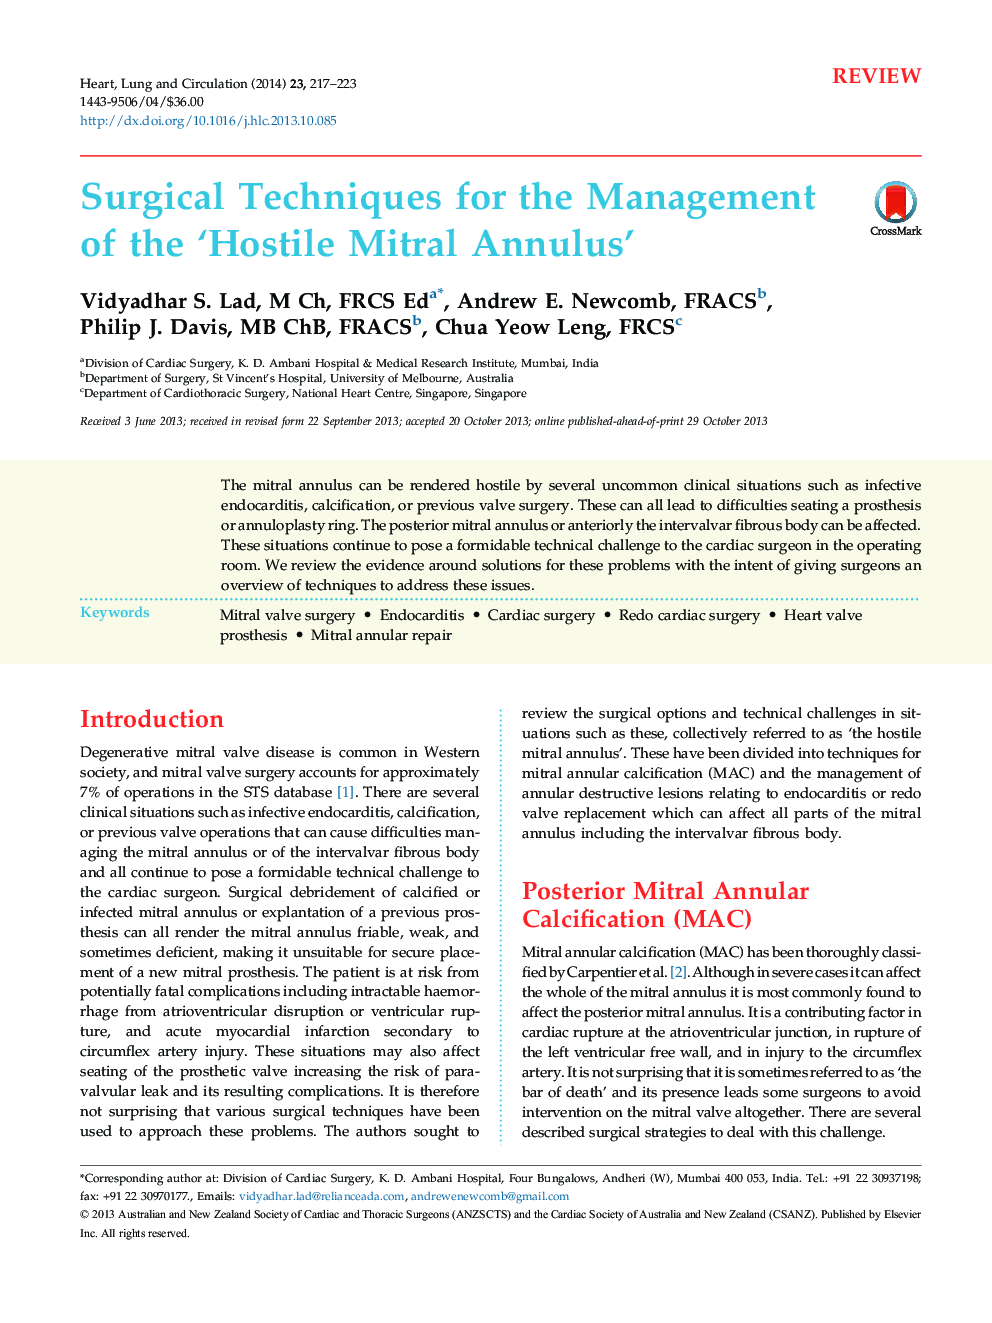 Surgical Techniques for the Management of the ‘Hostile Mitral Annulus’